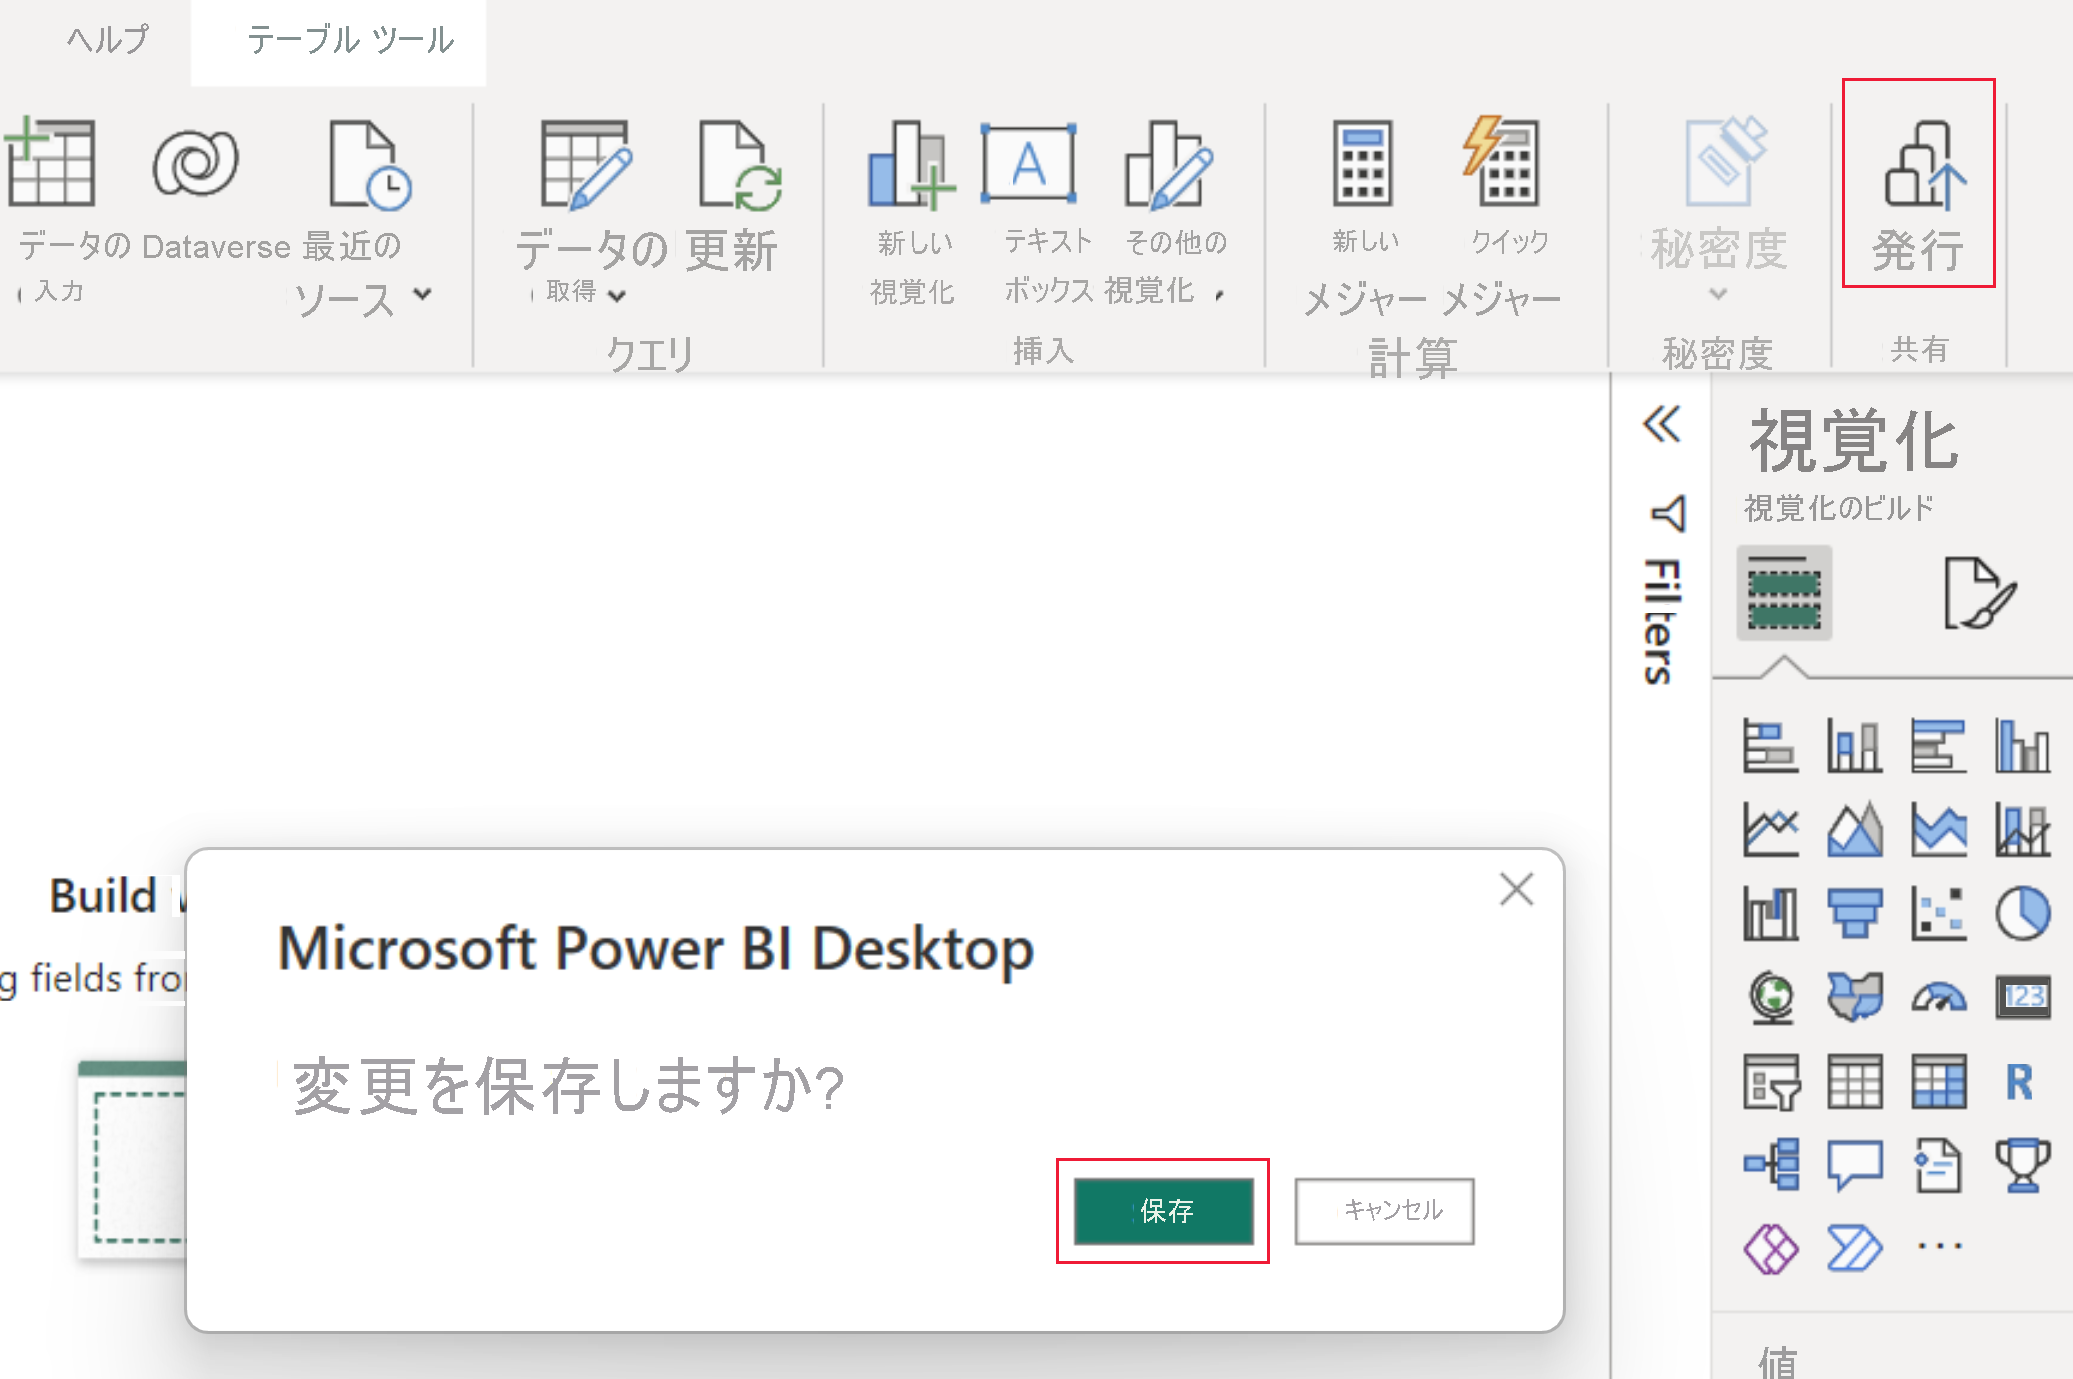 A screenshot showing the Microsoft Power B I Desktop pop up window after the publish button is selected. The publish and save buttons are highlighted.